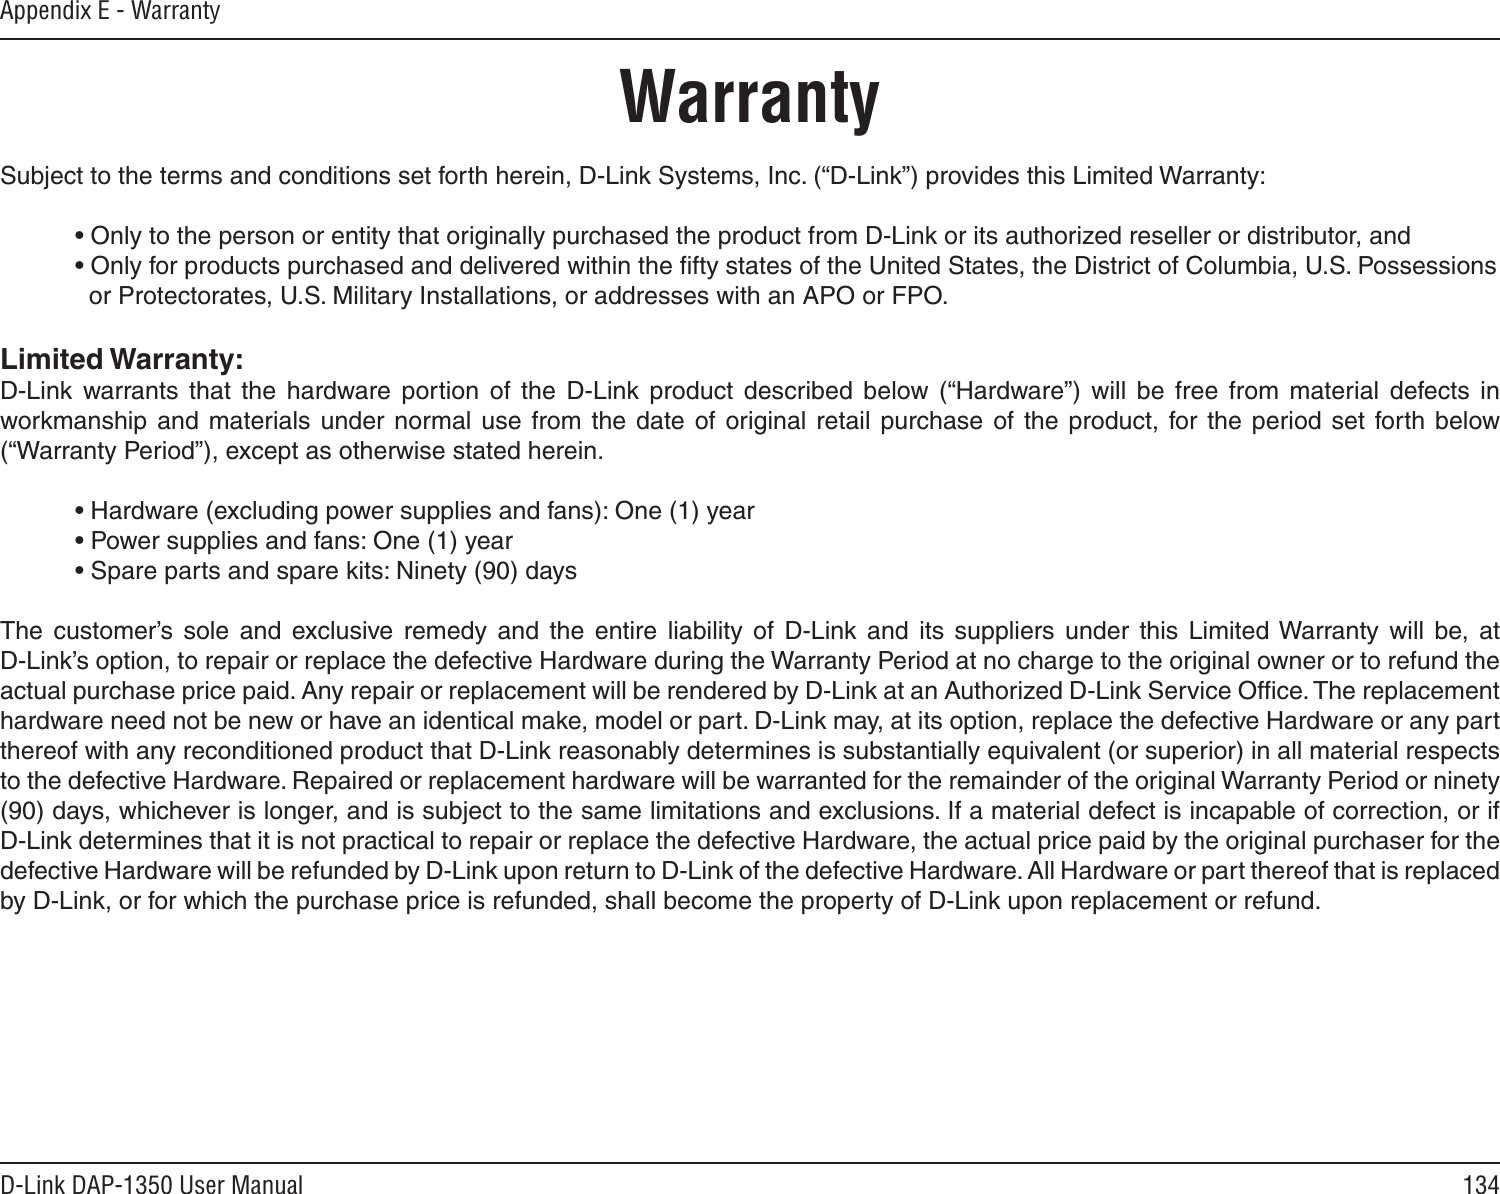 134D-Link DAP-1350 User ManualAppendix E - WarrantyWarrantySubject to the terms and conditions set forth herein, D-Link Systems, Inc. (“D-Link”) provides this Limited Warranty:  • Only to the person or entity that originally purchased the product from D-Link or its authorized reseller or distributor, and  • Only for products purchased and delivered within the ﬁfty states of the United States, the District of Columbia, U.S. Possessions      or Protectorates, U.S. Military Installations, or addresses with an APO or FPO.Limited Warranty:D-Link  warrants  that  the  hardware  portion  of  the  D-Link  product  described  below  (“Hardware”)  will  be  free  from  material  defects  in workmanship  and materials  under  normal  use from the date of  original  retail purchase of the product,  for the  period  set forth below (“Warranty Period”), except as otherwise stated herein.  • Hardware (excluding power supplies and fans): One (1) year  • Power supplies and fans: One (1) year  • Spare parts and spare kits: Ninety (90) daysThe  customer’s  sole  and  exclusive remedy  and  the  entire  liability  of  D-Link  and  its  suppliers  under  this  Limited Warranty  will  be,  at  D-Link’s option, to repair or replace the defective Hardware during the Warranty Period at no charge to the original owner or to refund the actual purchase price paid. Any repair or replacement will be rendered by D-Link at an Authorized D-Link Service Ofﬁce. The replacement hardware need not be new or have an identical make, model or part. D-Link may, at its option, replace the defective Hardware or any part thereof with any reconditioned product that D-Link reasonably determines is substantially equivalent (or superior) in all material respects to the defective Hardware. Repaired or replacement hardware will be warranted for the remainder of the original Warranty Period or ninety (90) days, whichever is longer, and is subject to the same limitations and exclusions. If a material defect is incapable of correction, or if D-Link determines that it is not practical to repair or replace the defective Hardware, the actual price paid by the original purchaser for the defective Hardware will be refunded by D-Link upon return to D-Link of the defective Hardware. All Hardware or part thereof that is replaced by D-Link, or for which the purchase price is refunded, shall become the property of D-Link upon replacement or refund.